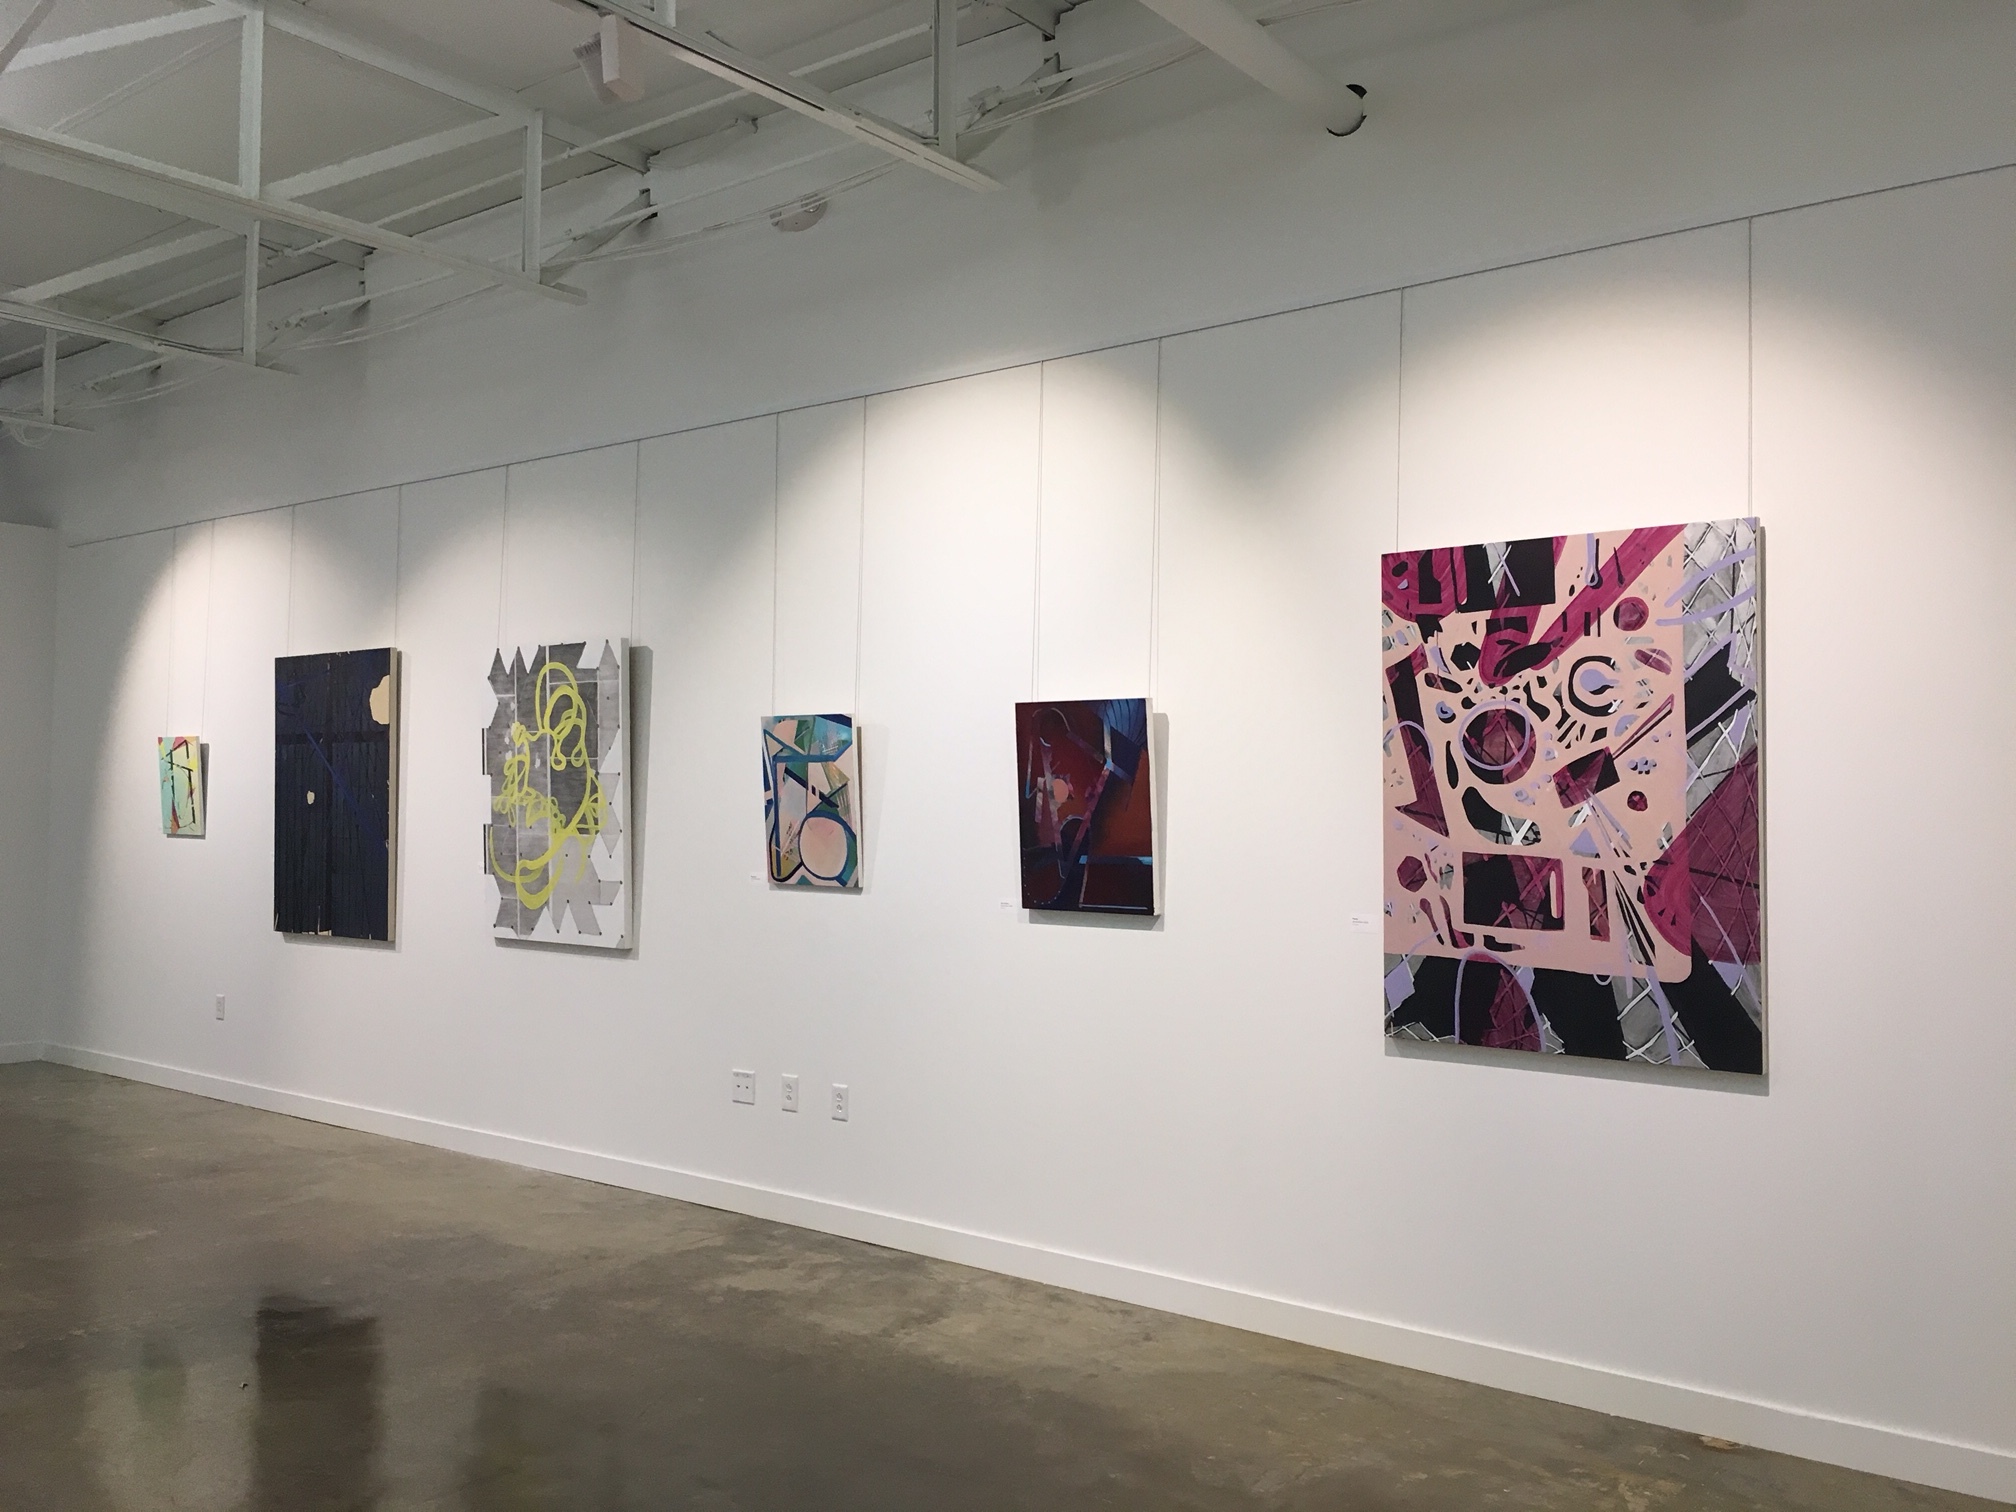  Installation view at Sherle Wagner Art Gallery, Dallas, TX, 12/2016-2/2017 